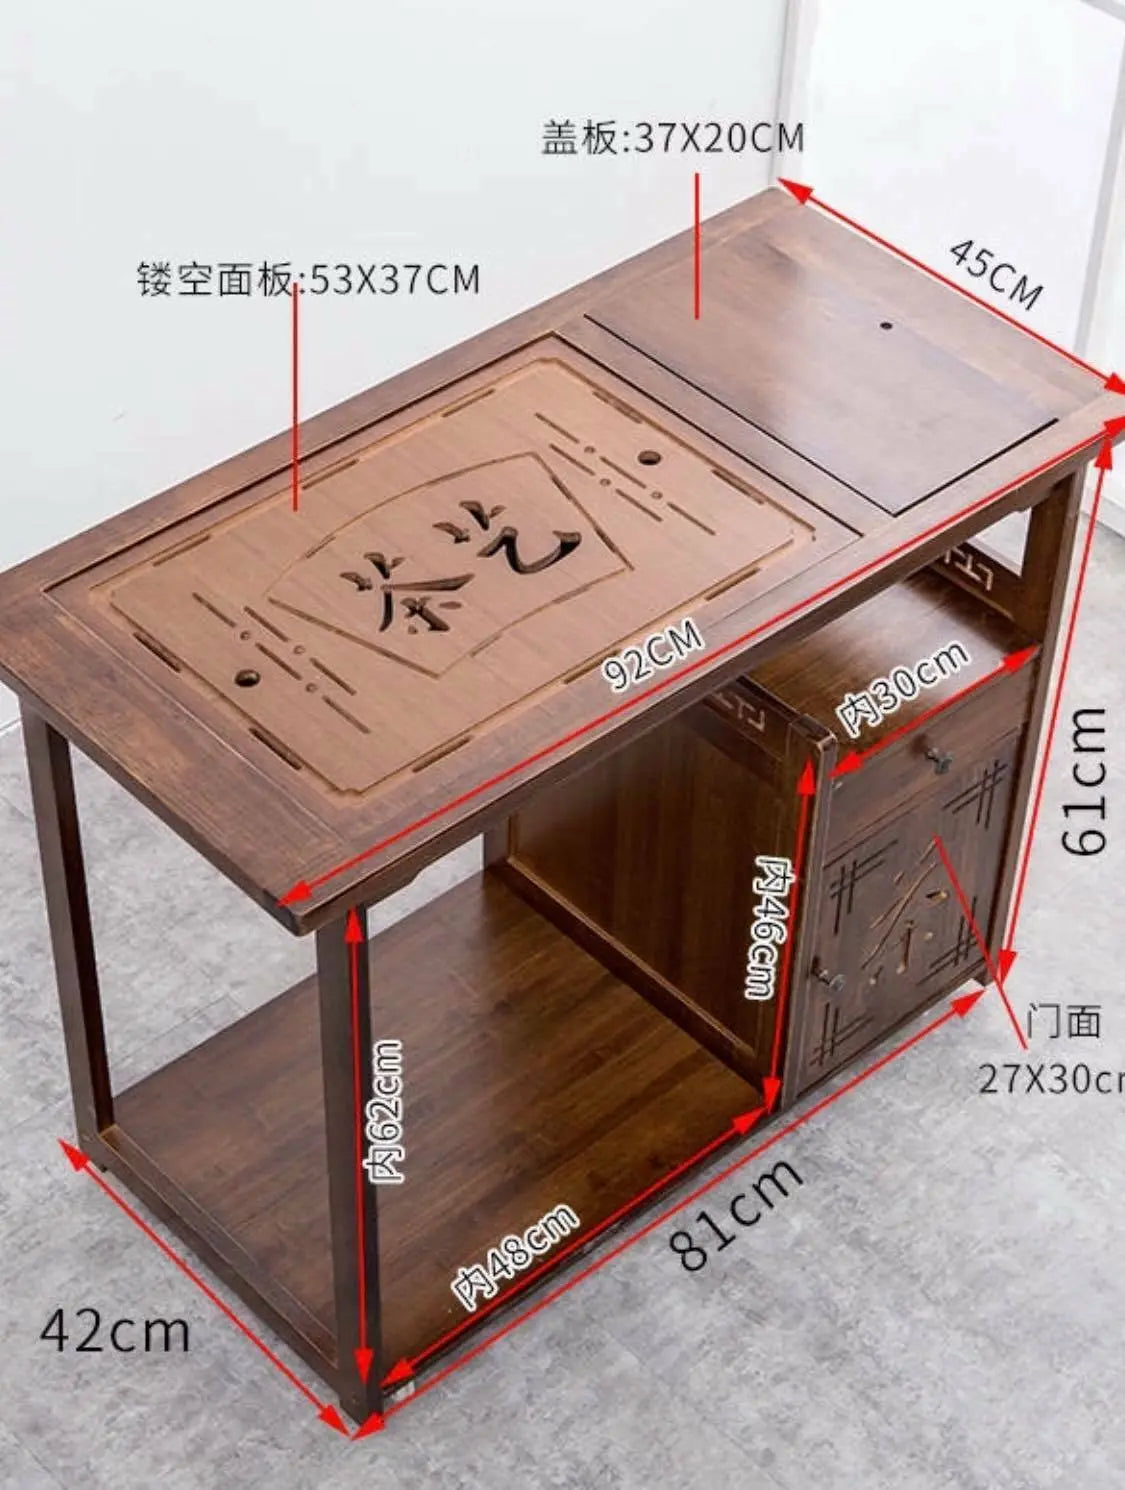 Bamboo Table Bamboo Gongfu Tea Coffee Table Serving Tray Cabinet With Wheels everythingbamboo